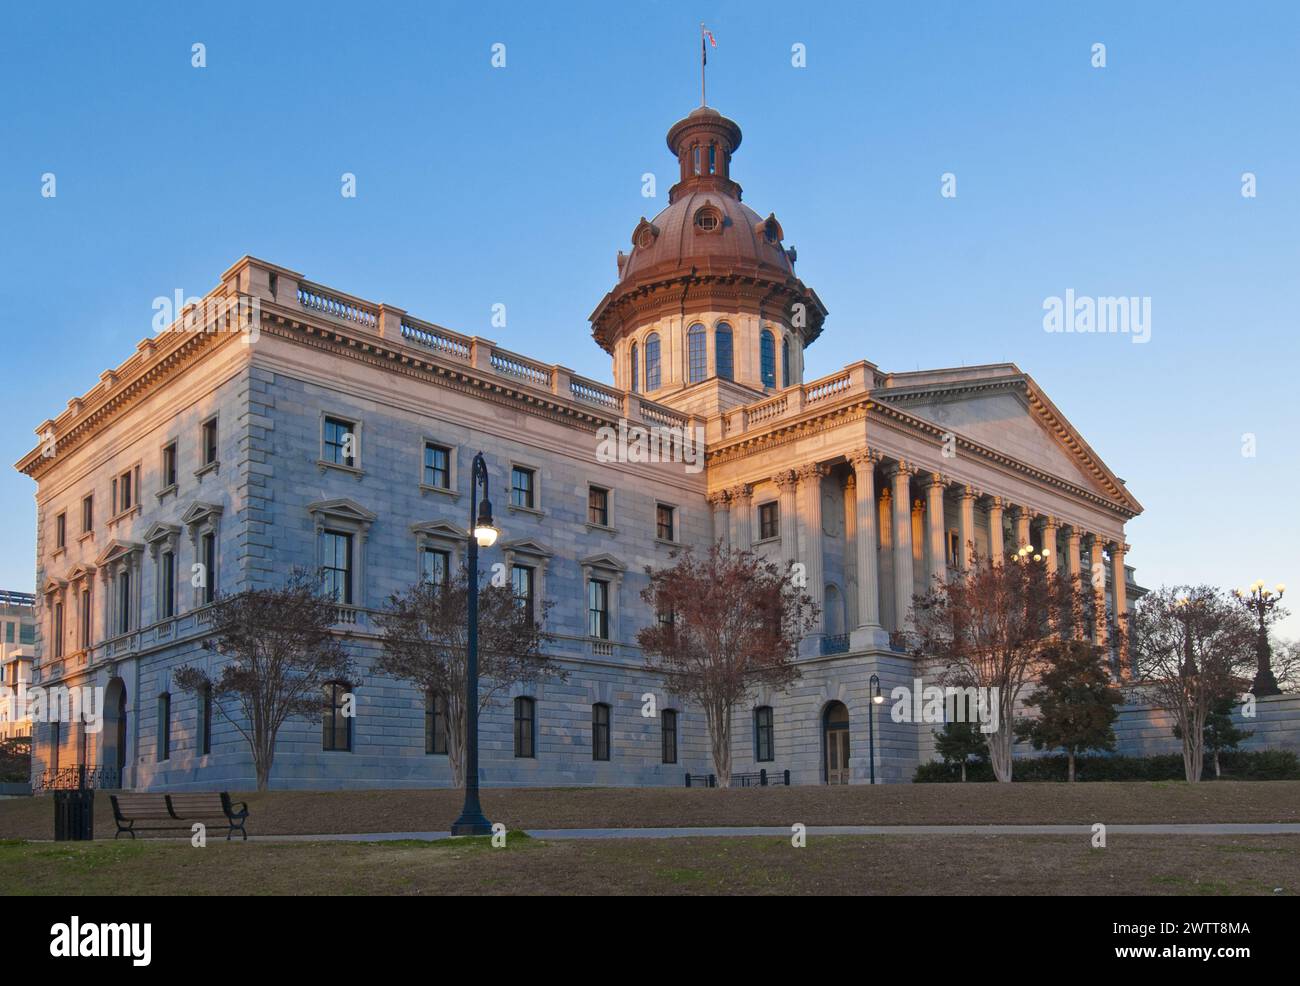 South Carolina State House, built in Greek Revival style in 1855, a National Historic Landmark in Columbia, South Carolina Stock Photo